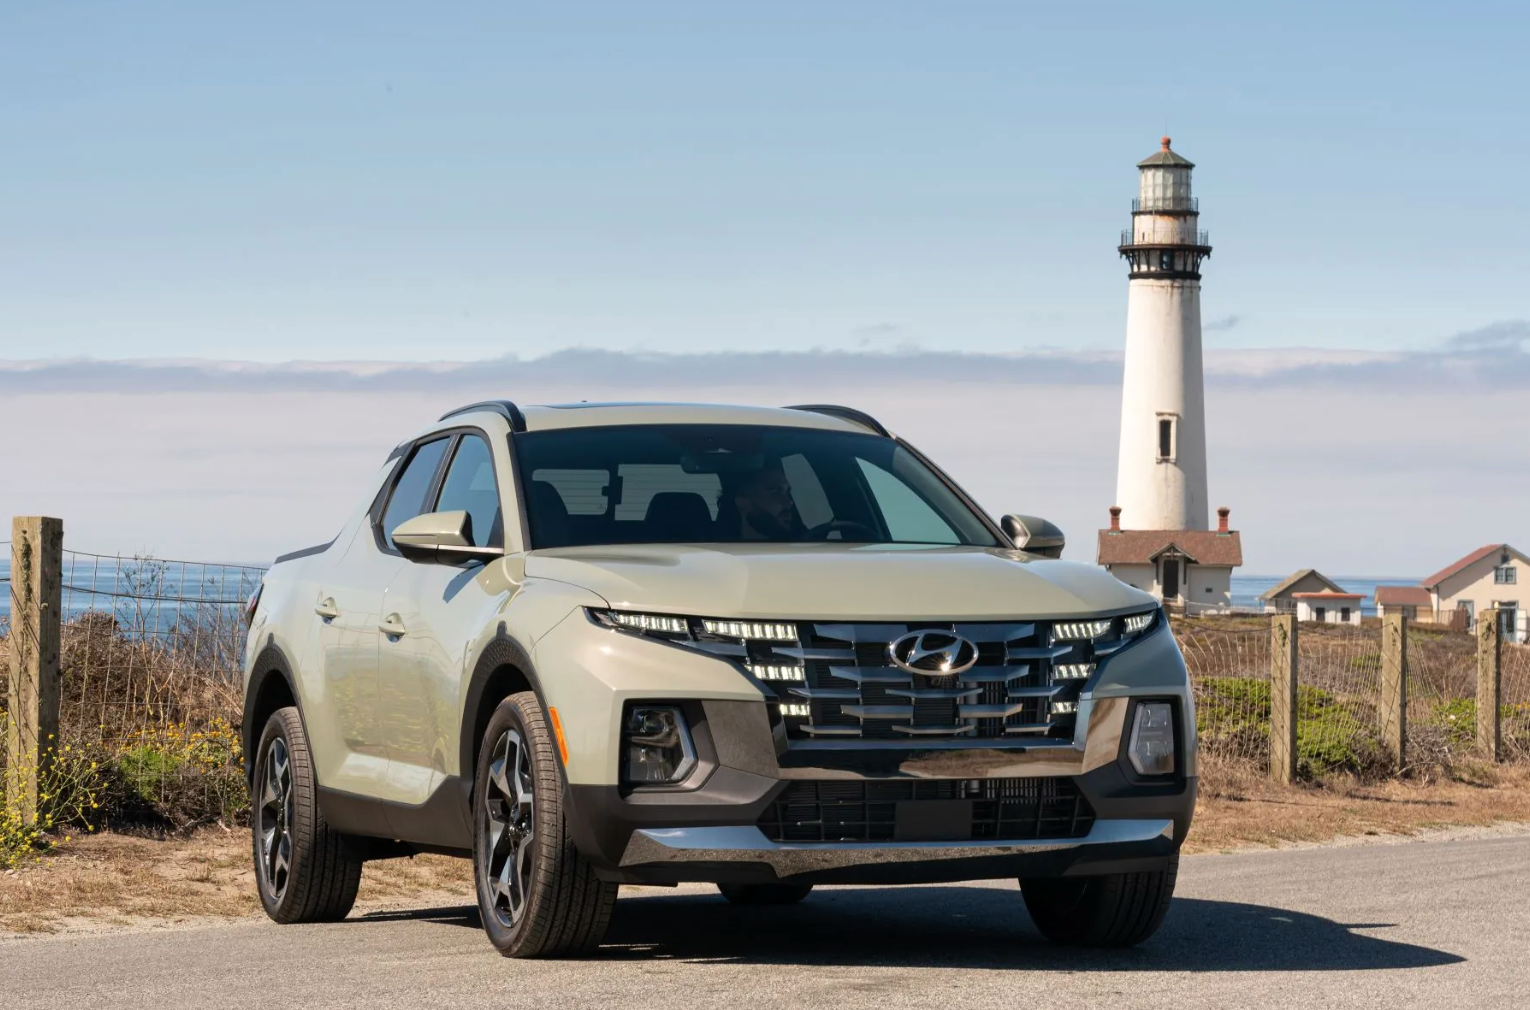 2022 Hyundai Santa Cruz parked in front of a lighthouse